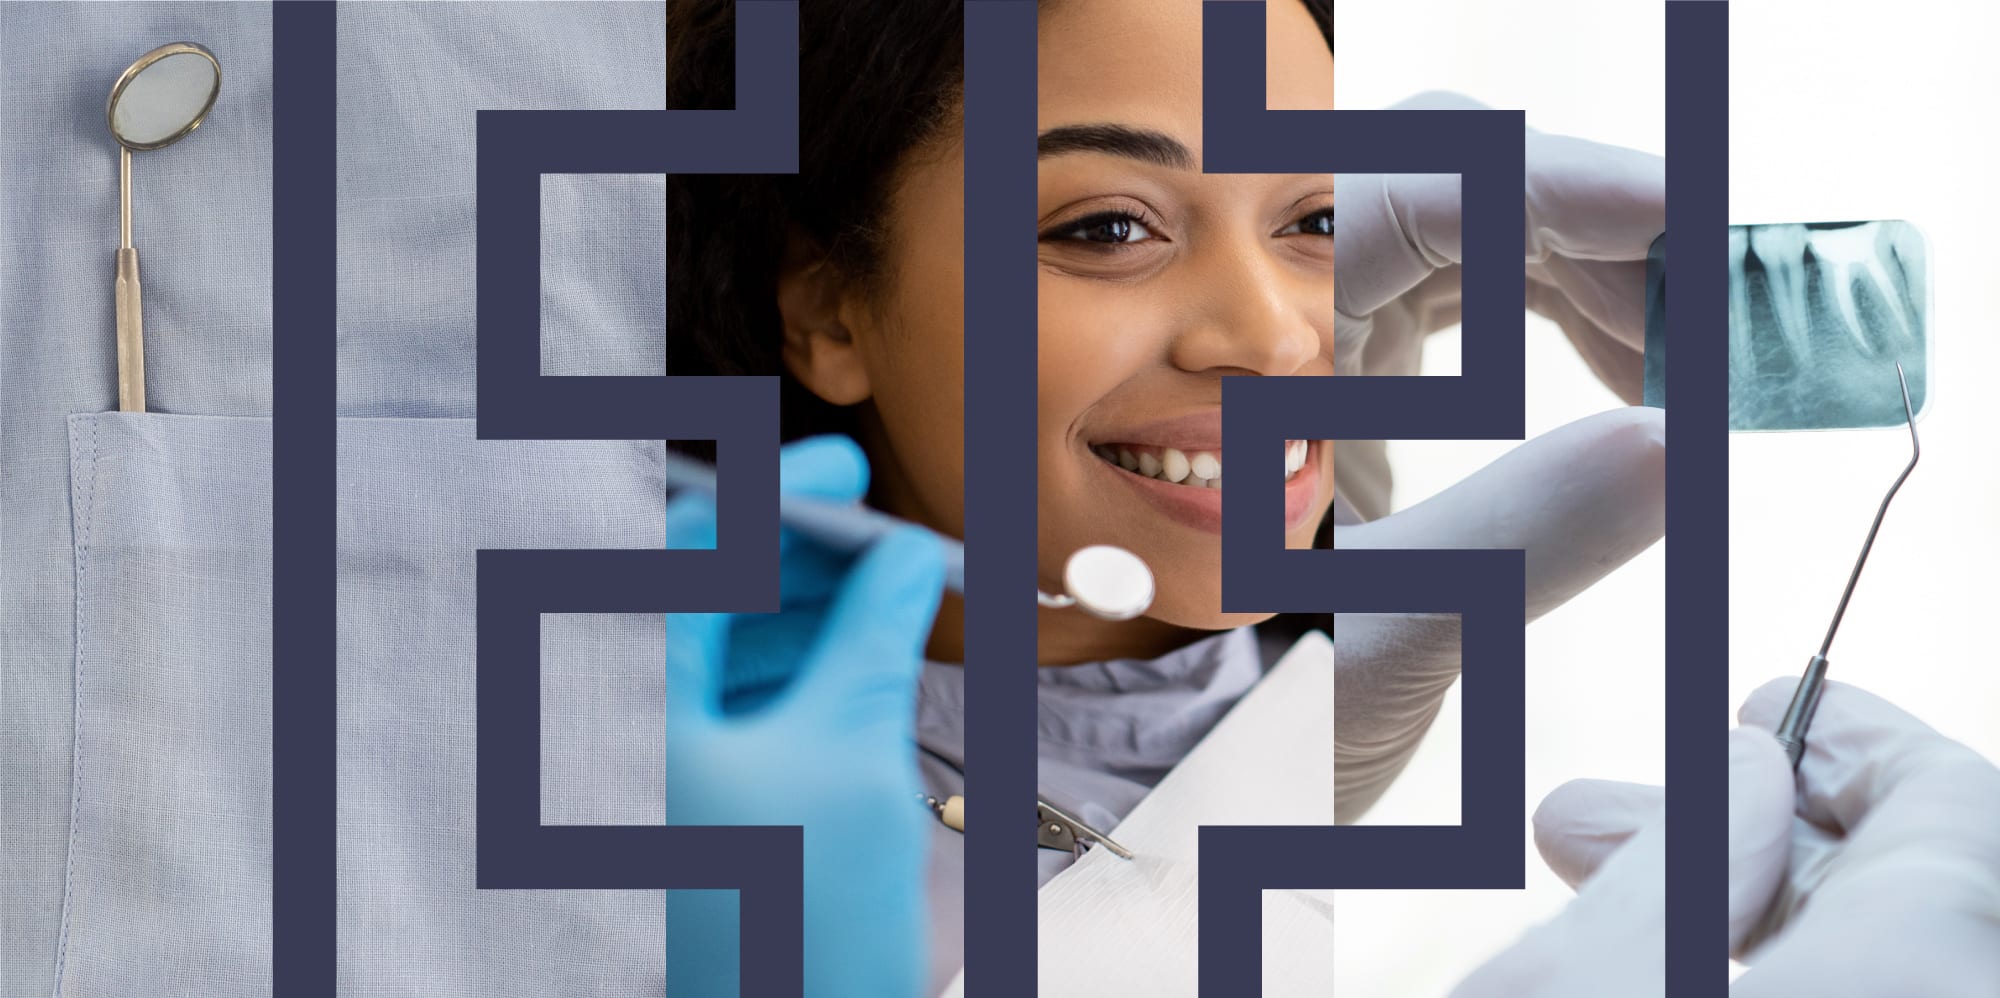 A group of three images. The first one being of a close up of a dental instrument, the second of a young woman smiling, and the third of a close up of a dental Xray